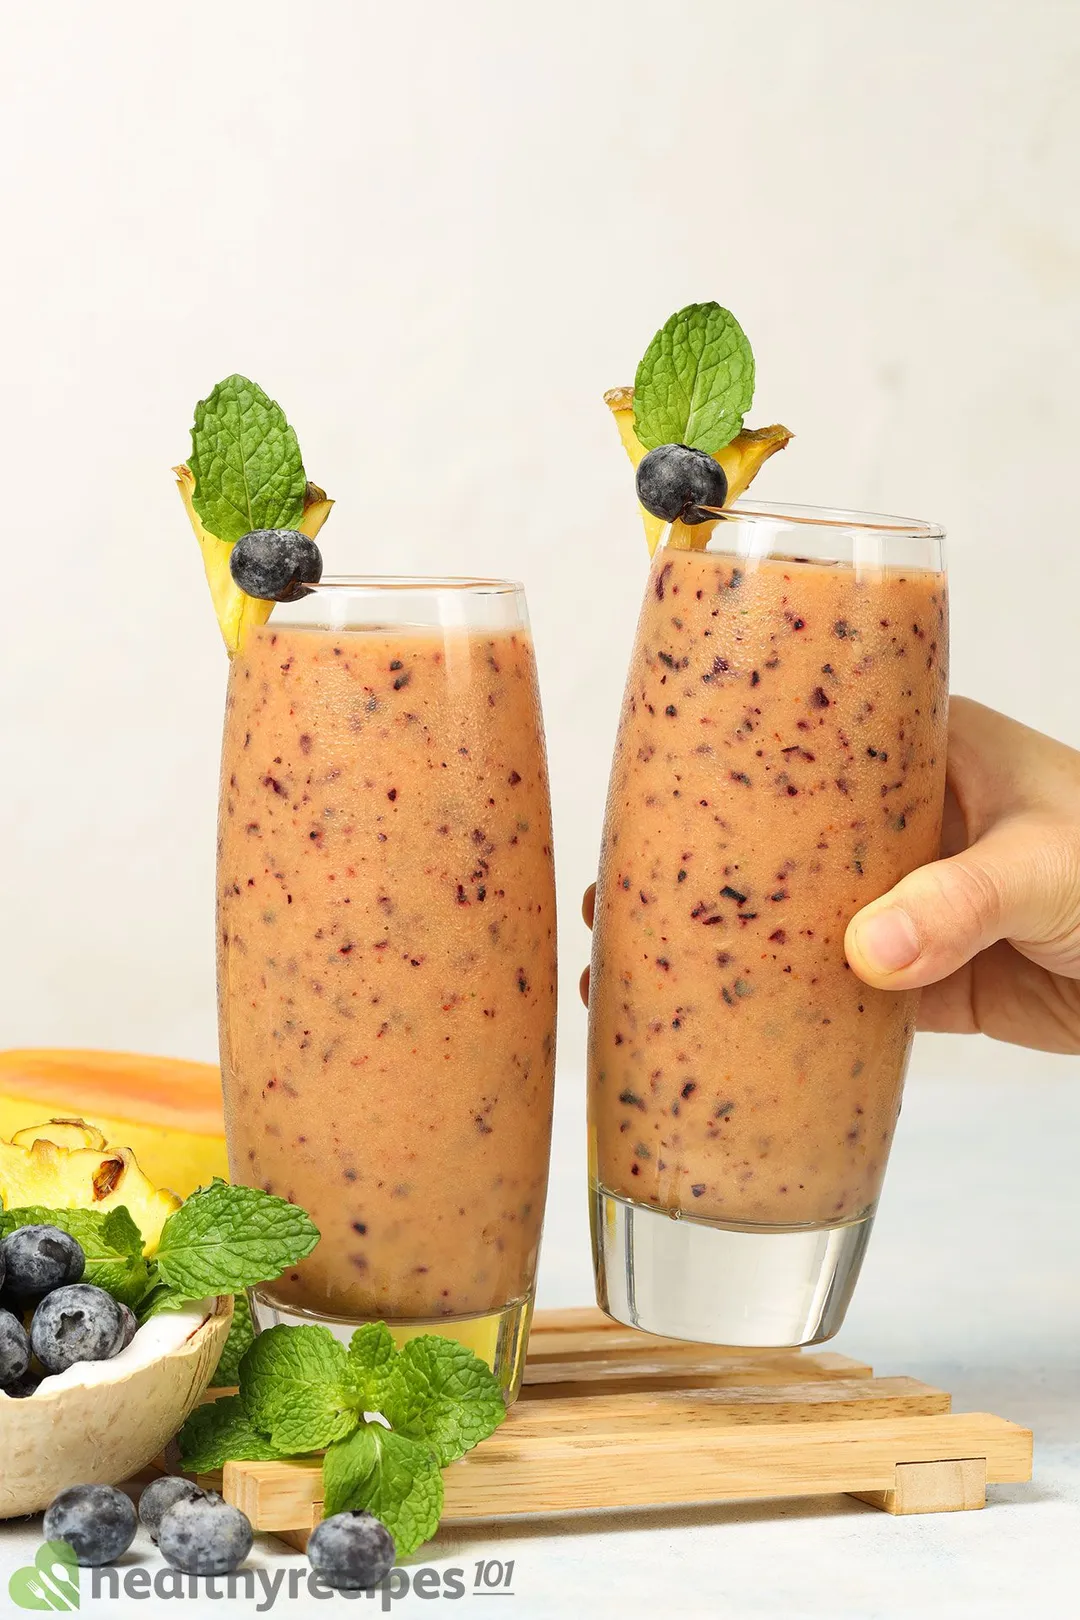 two glasses of mango blueberry smoothie, one on a tray and a hand holding the other